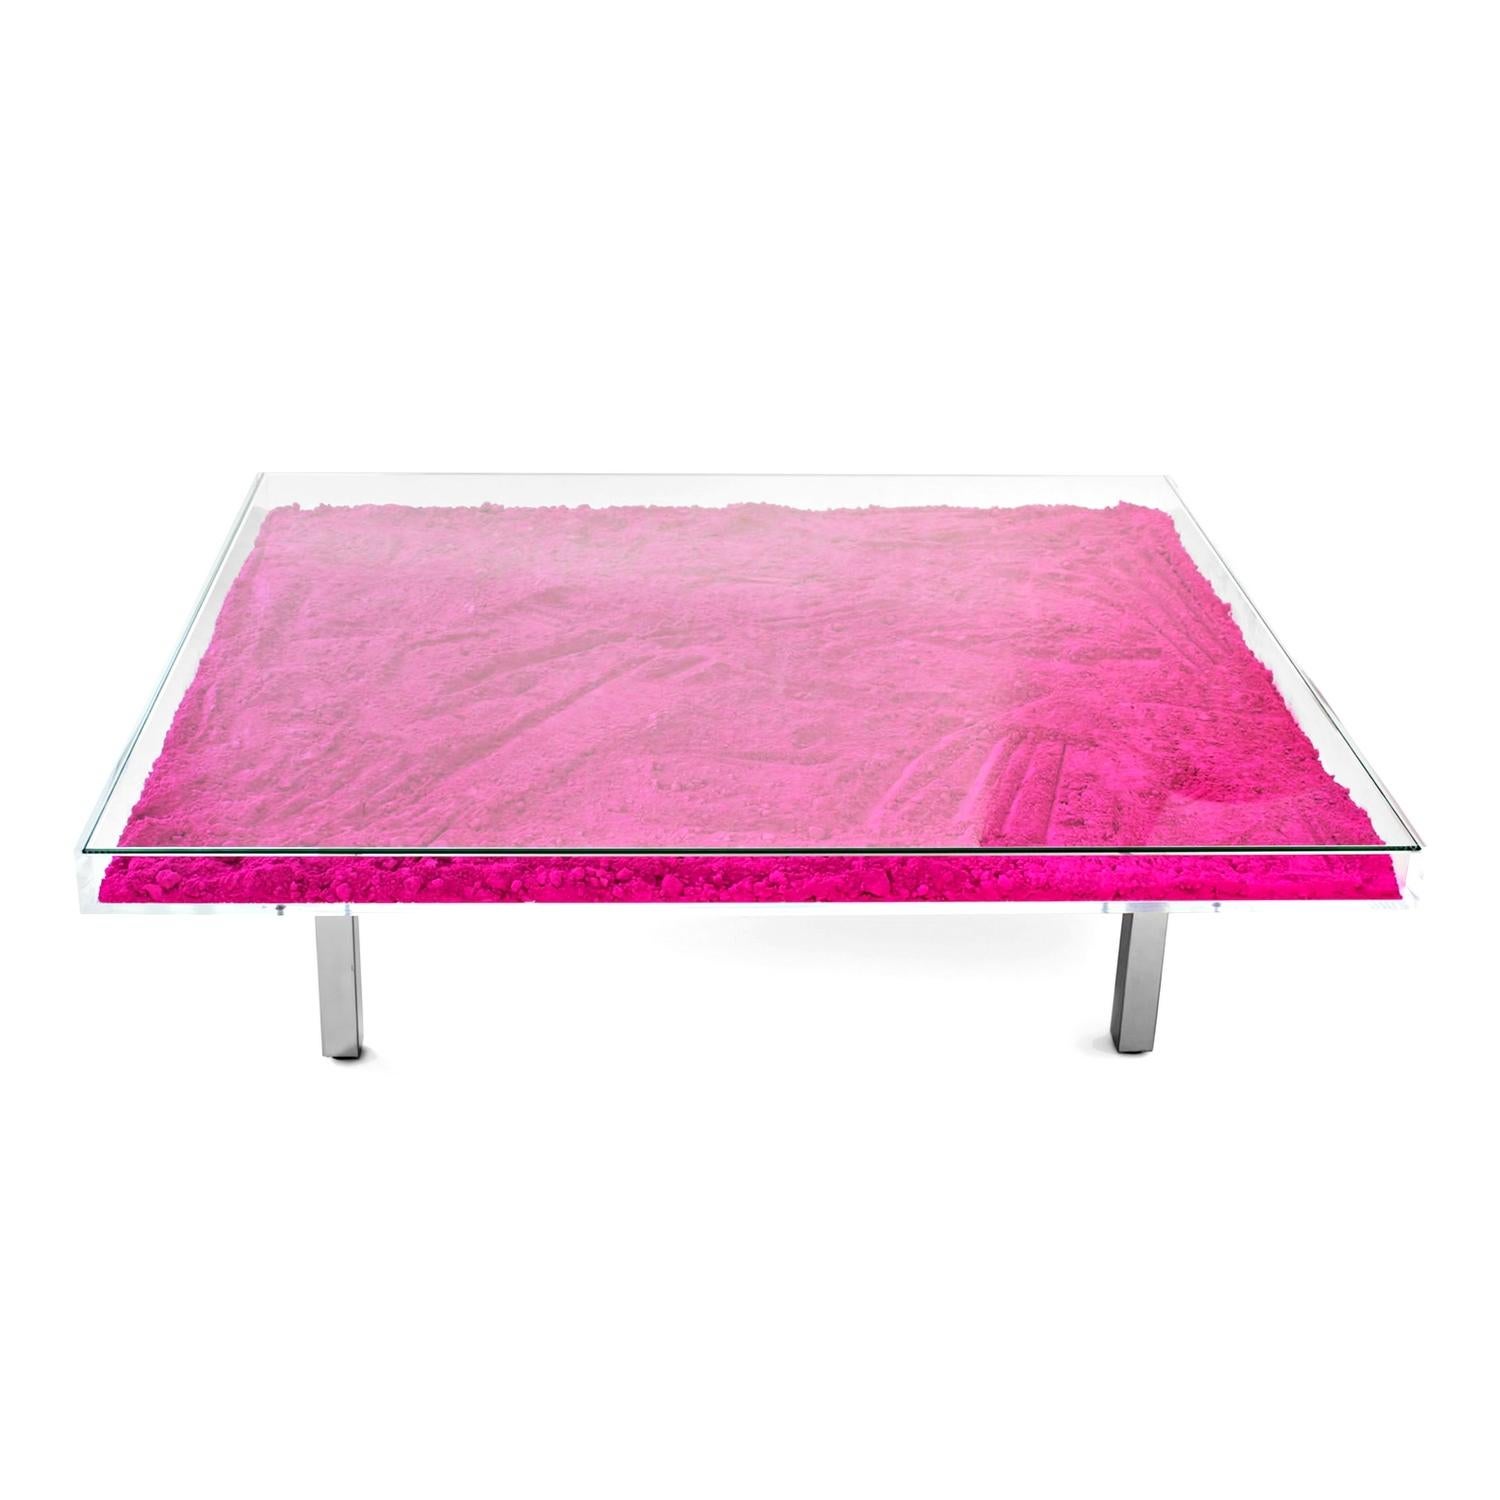 Modern MonoPink Table Yves Klein Table, Made in France